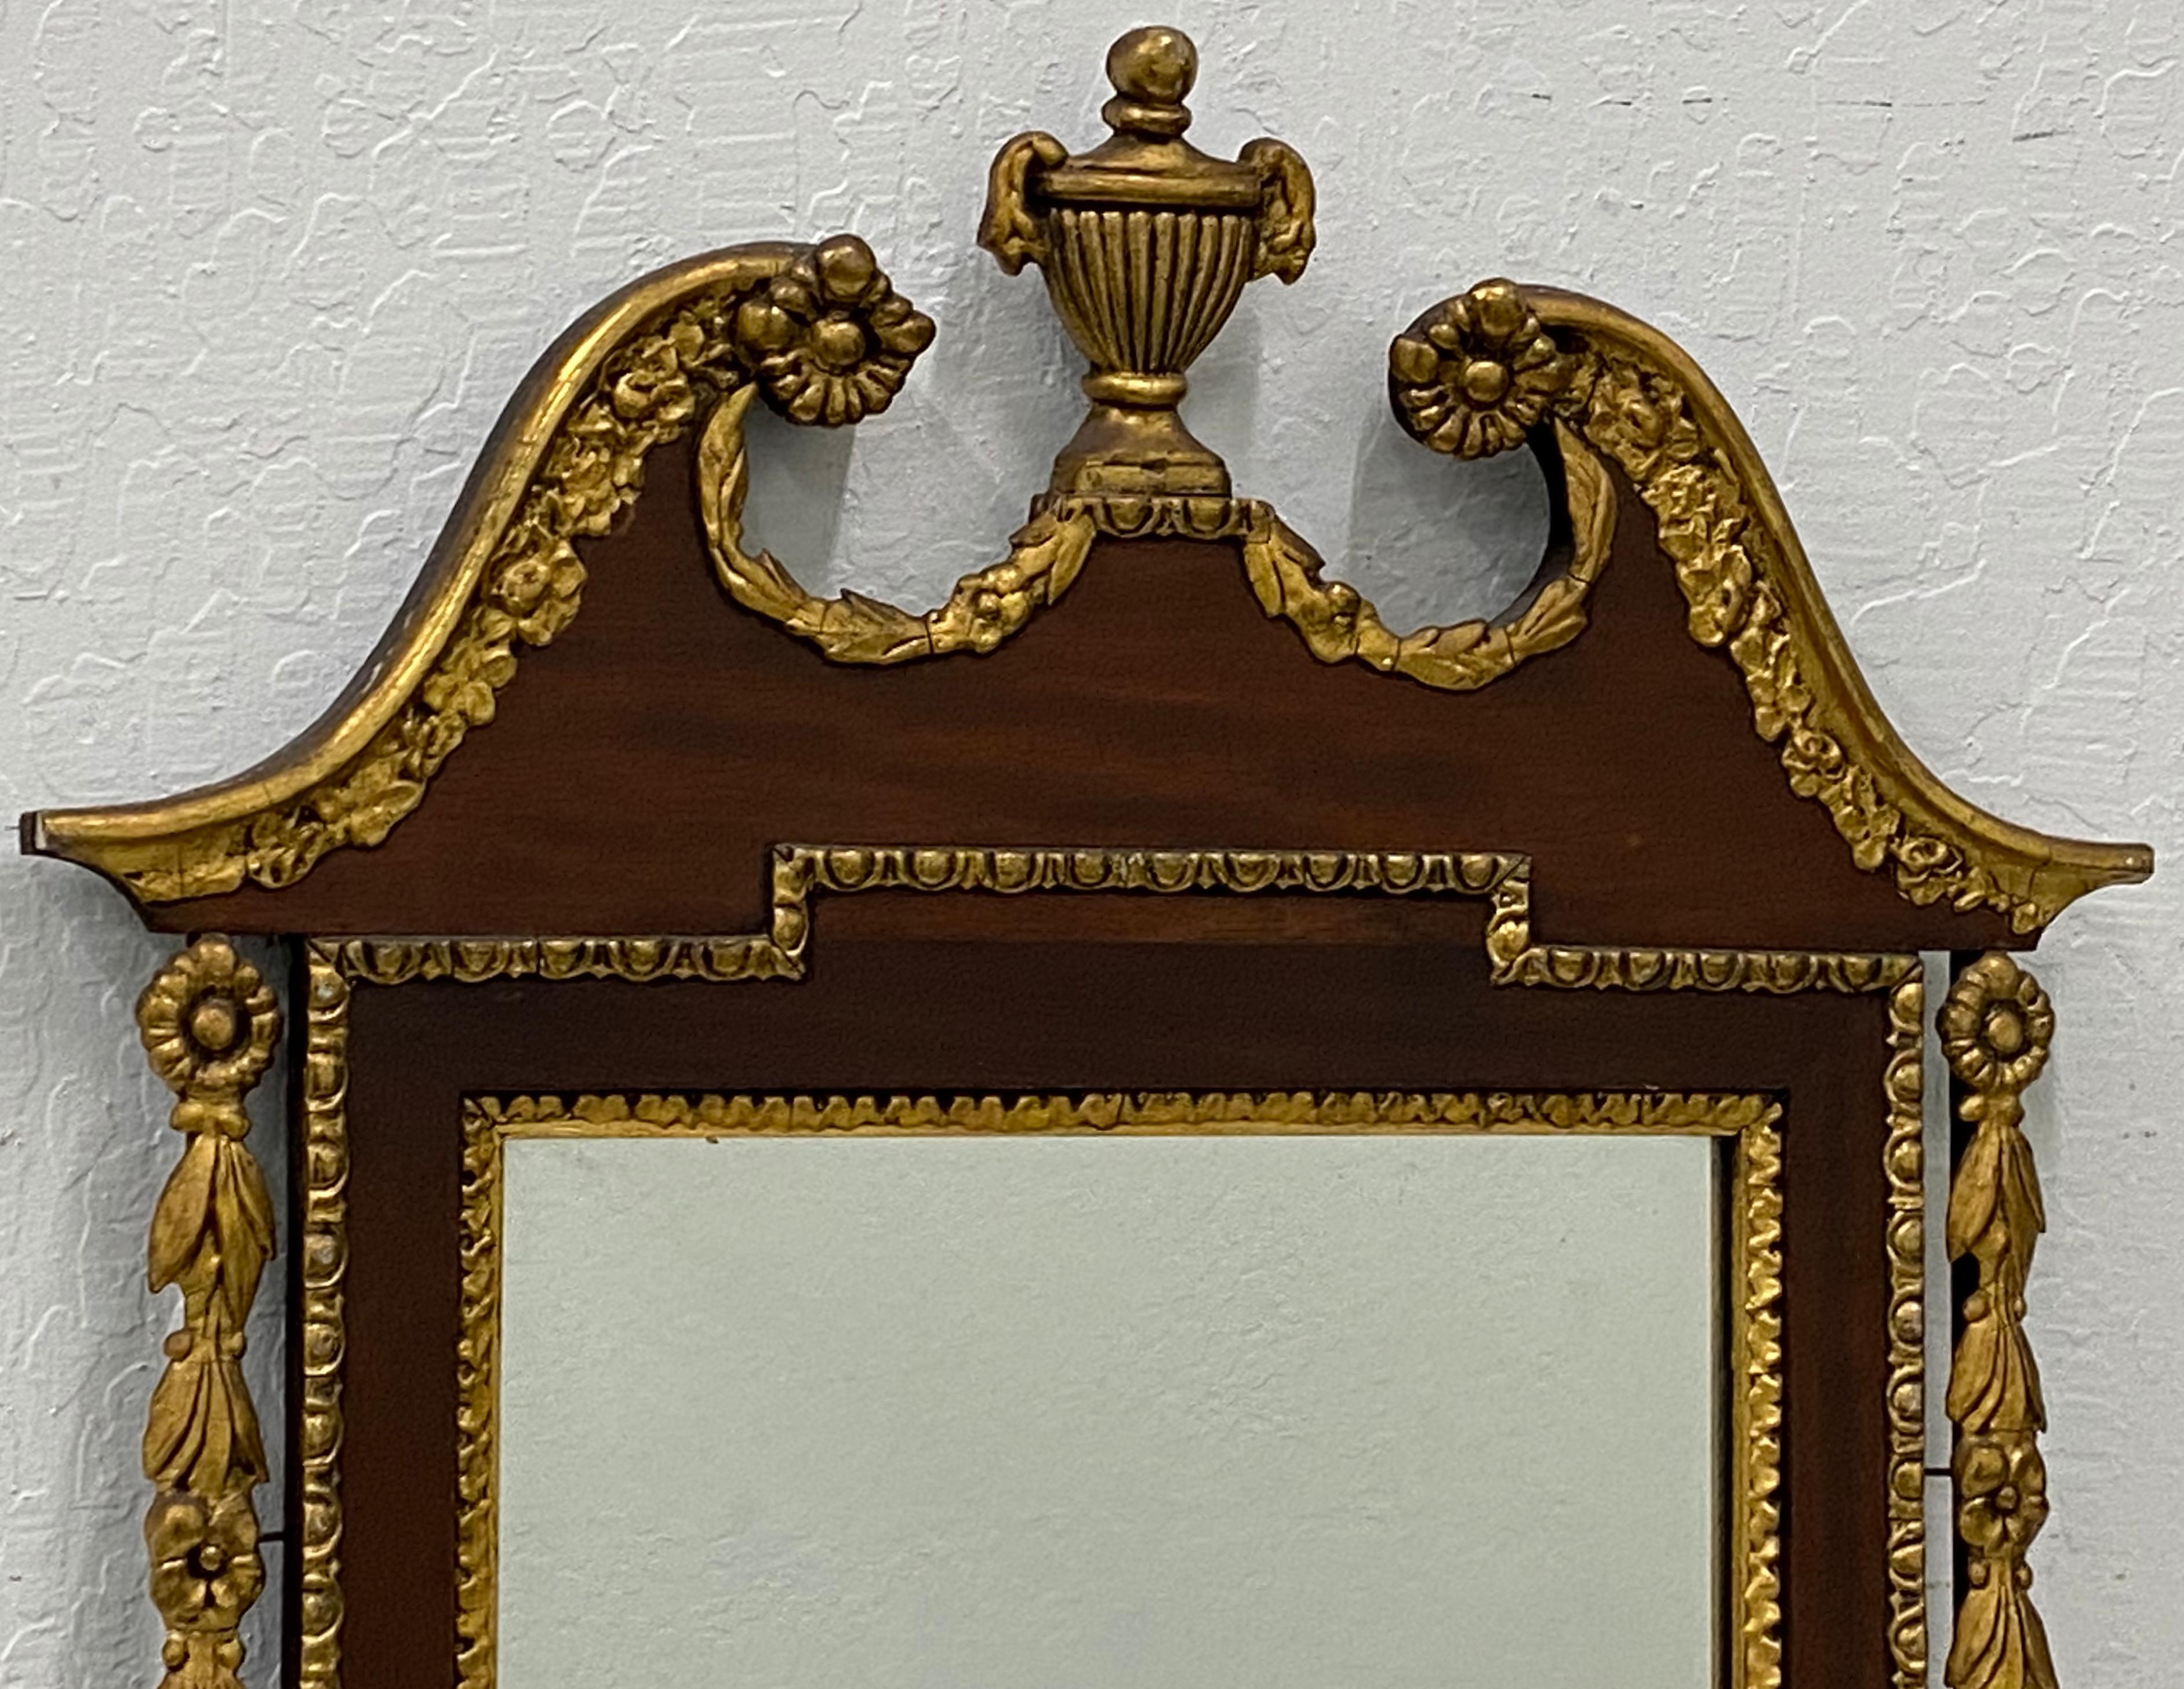 19th century hand carved and gilded mahogany wall mirror

Mirror dimensions 14